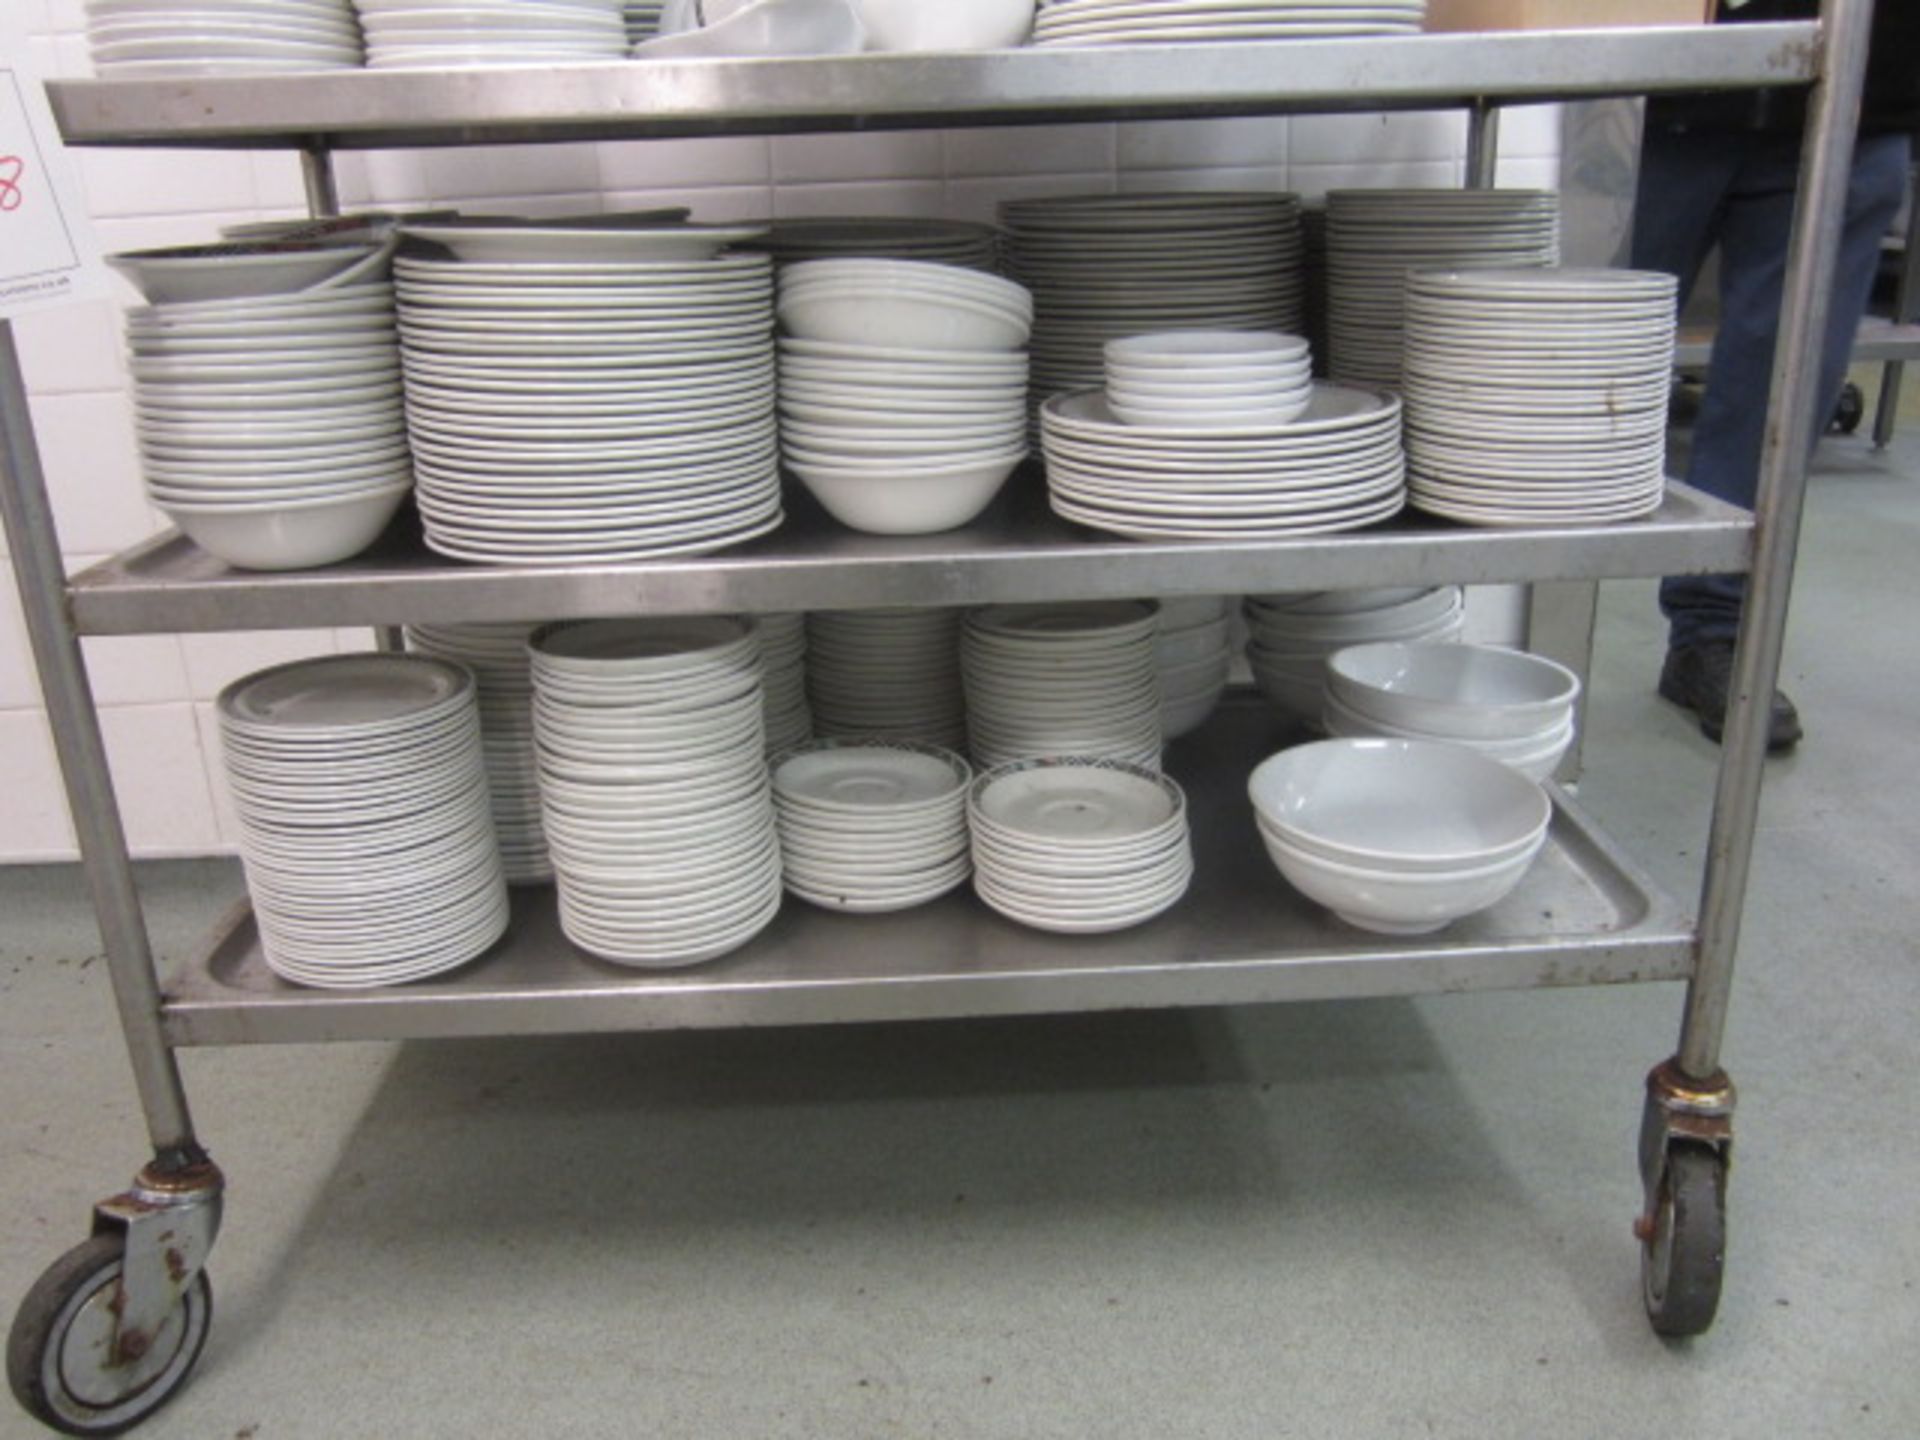 Quantity of assorted chinaware including plates, cups, saucers, jugs, serving bowls, etc., - Image 2 of 7